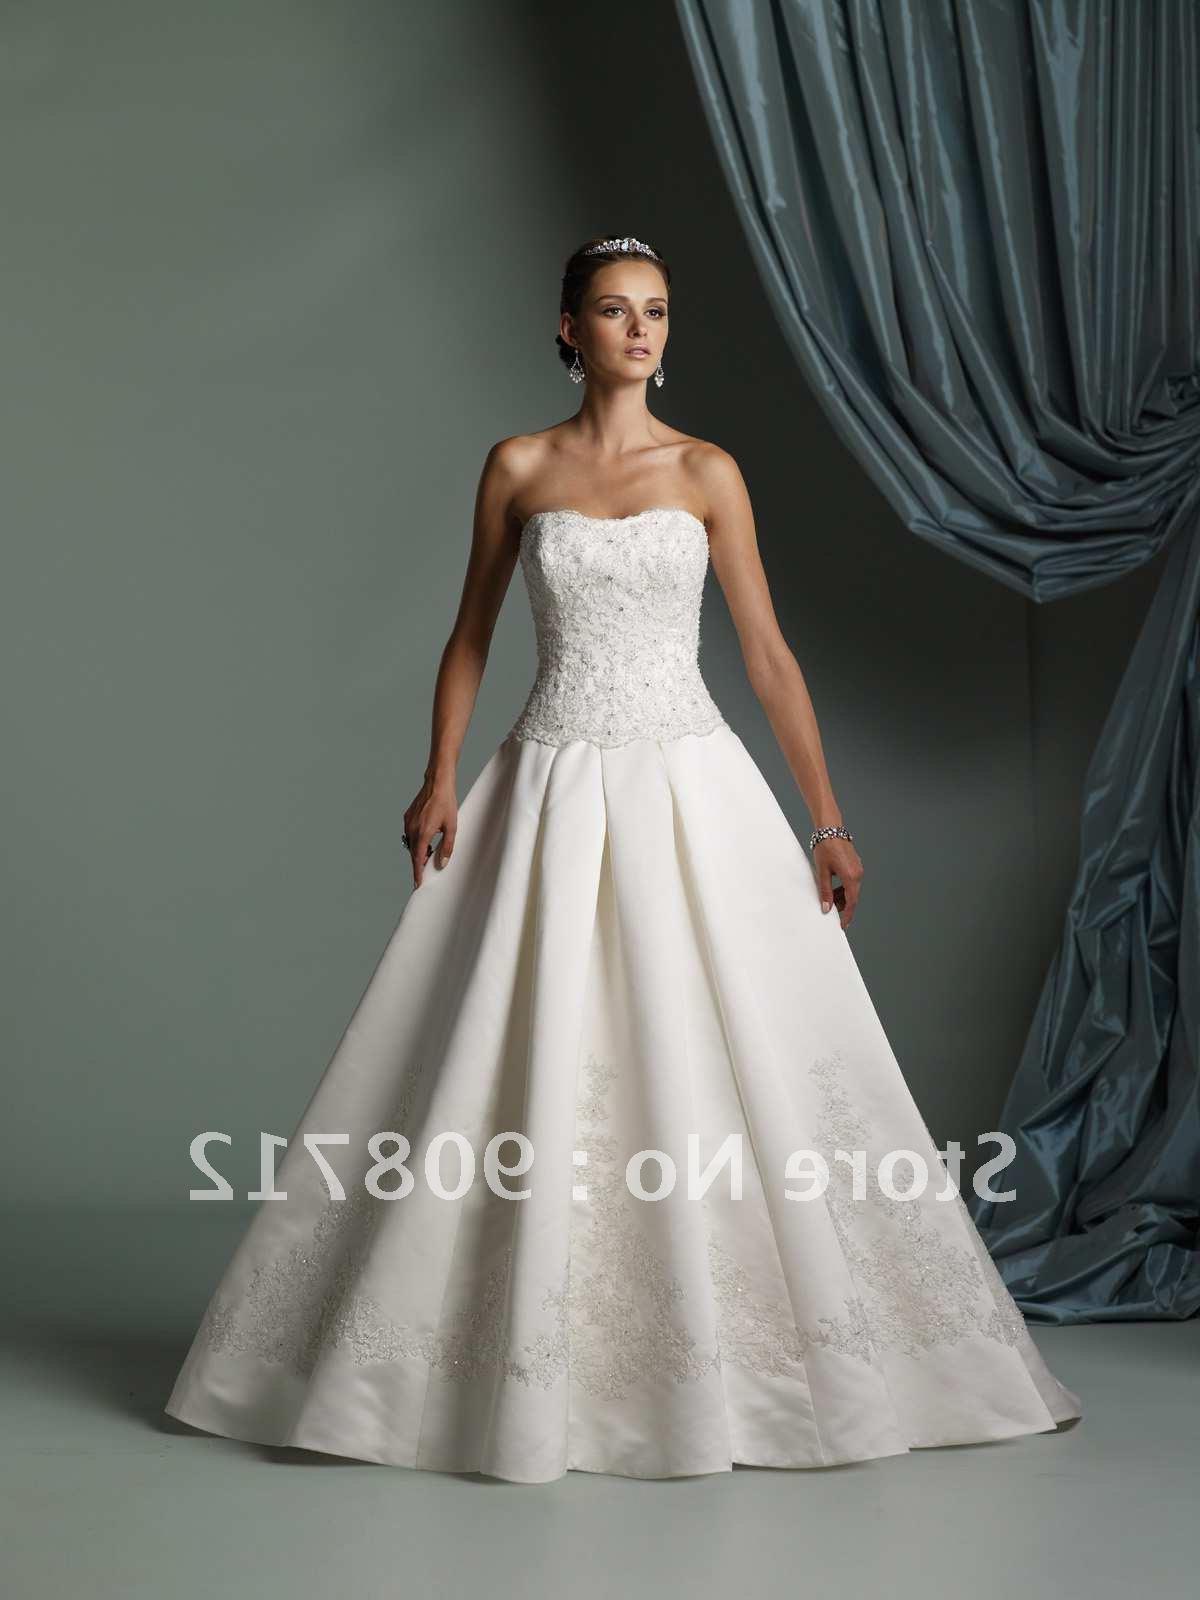 Buy delicate beading accented with Swarovski crystals wedding dress